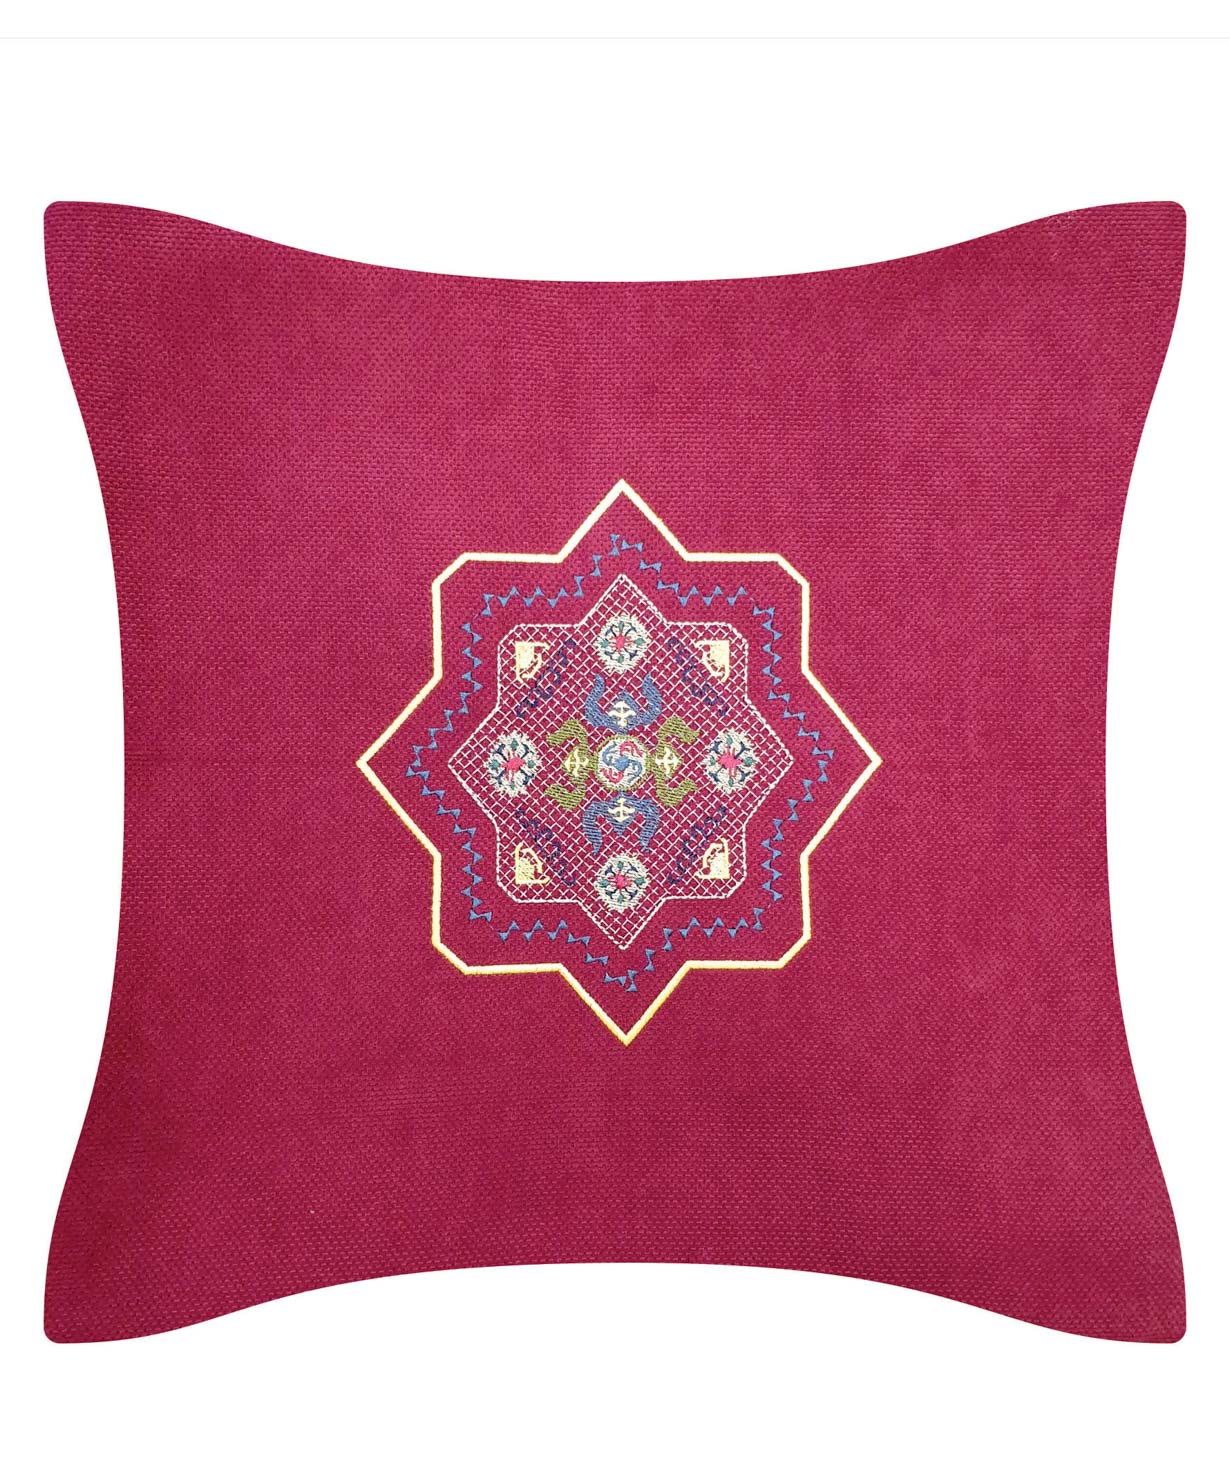 Pillow `Miskaryan heritage` embroidered with Armenian ornament №38